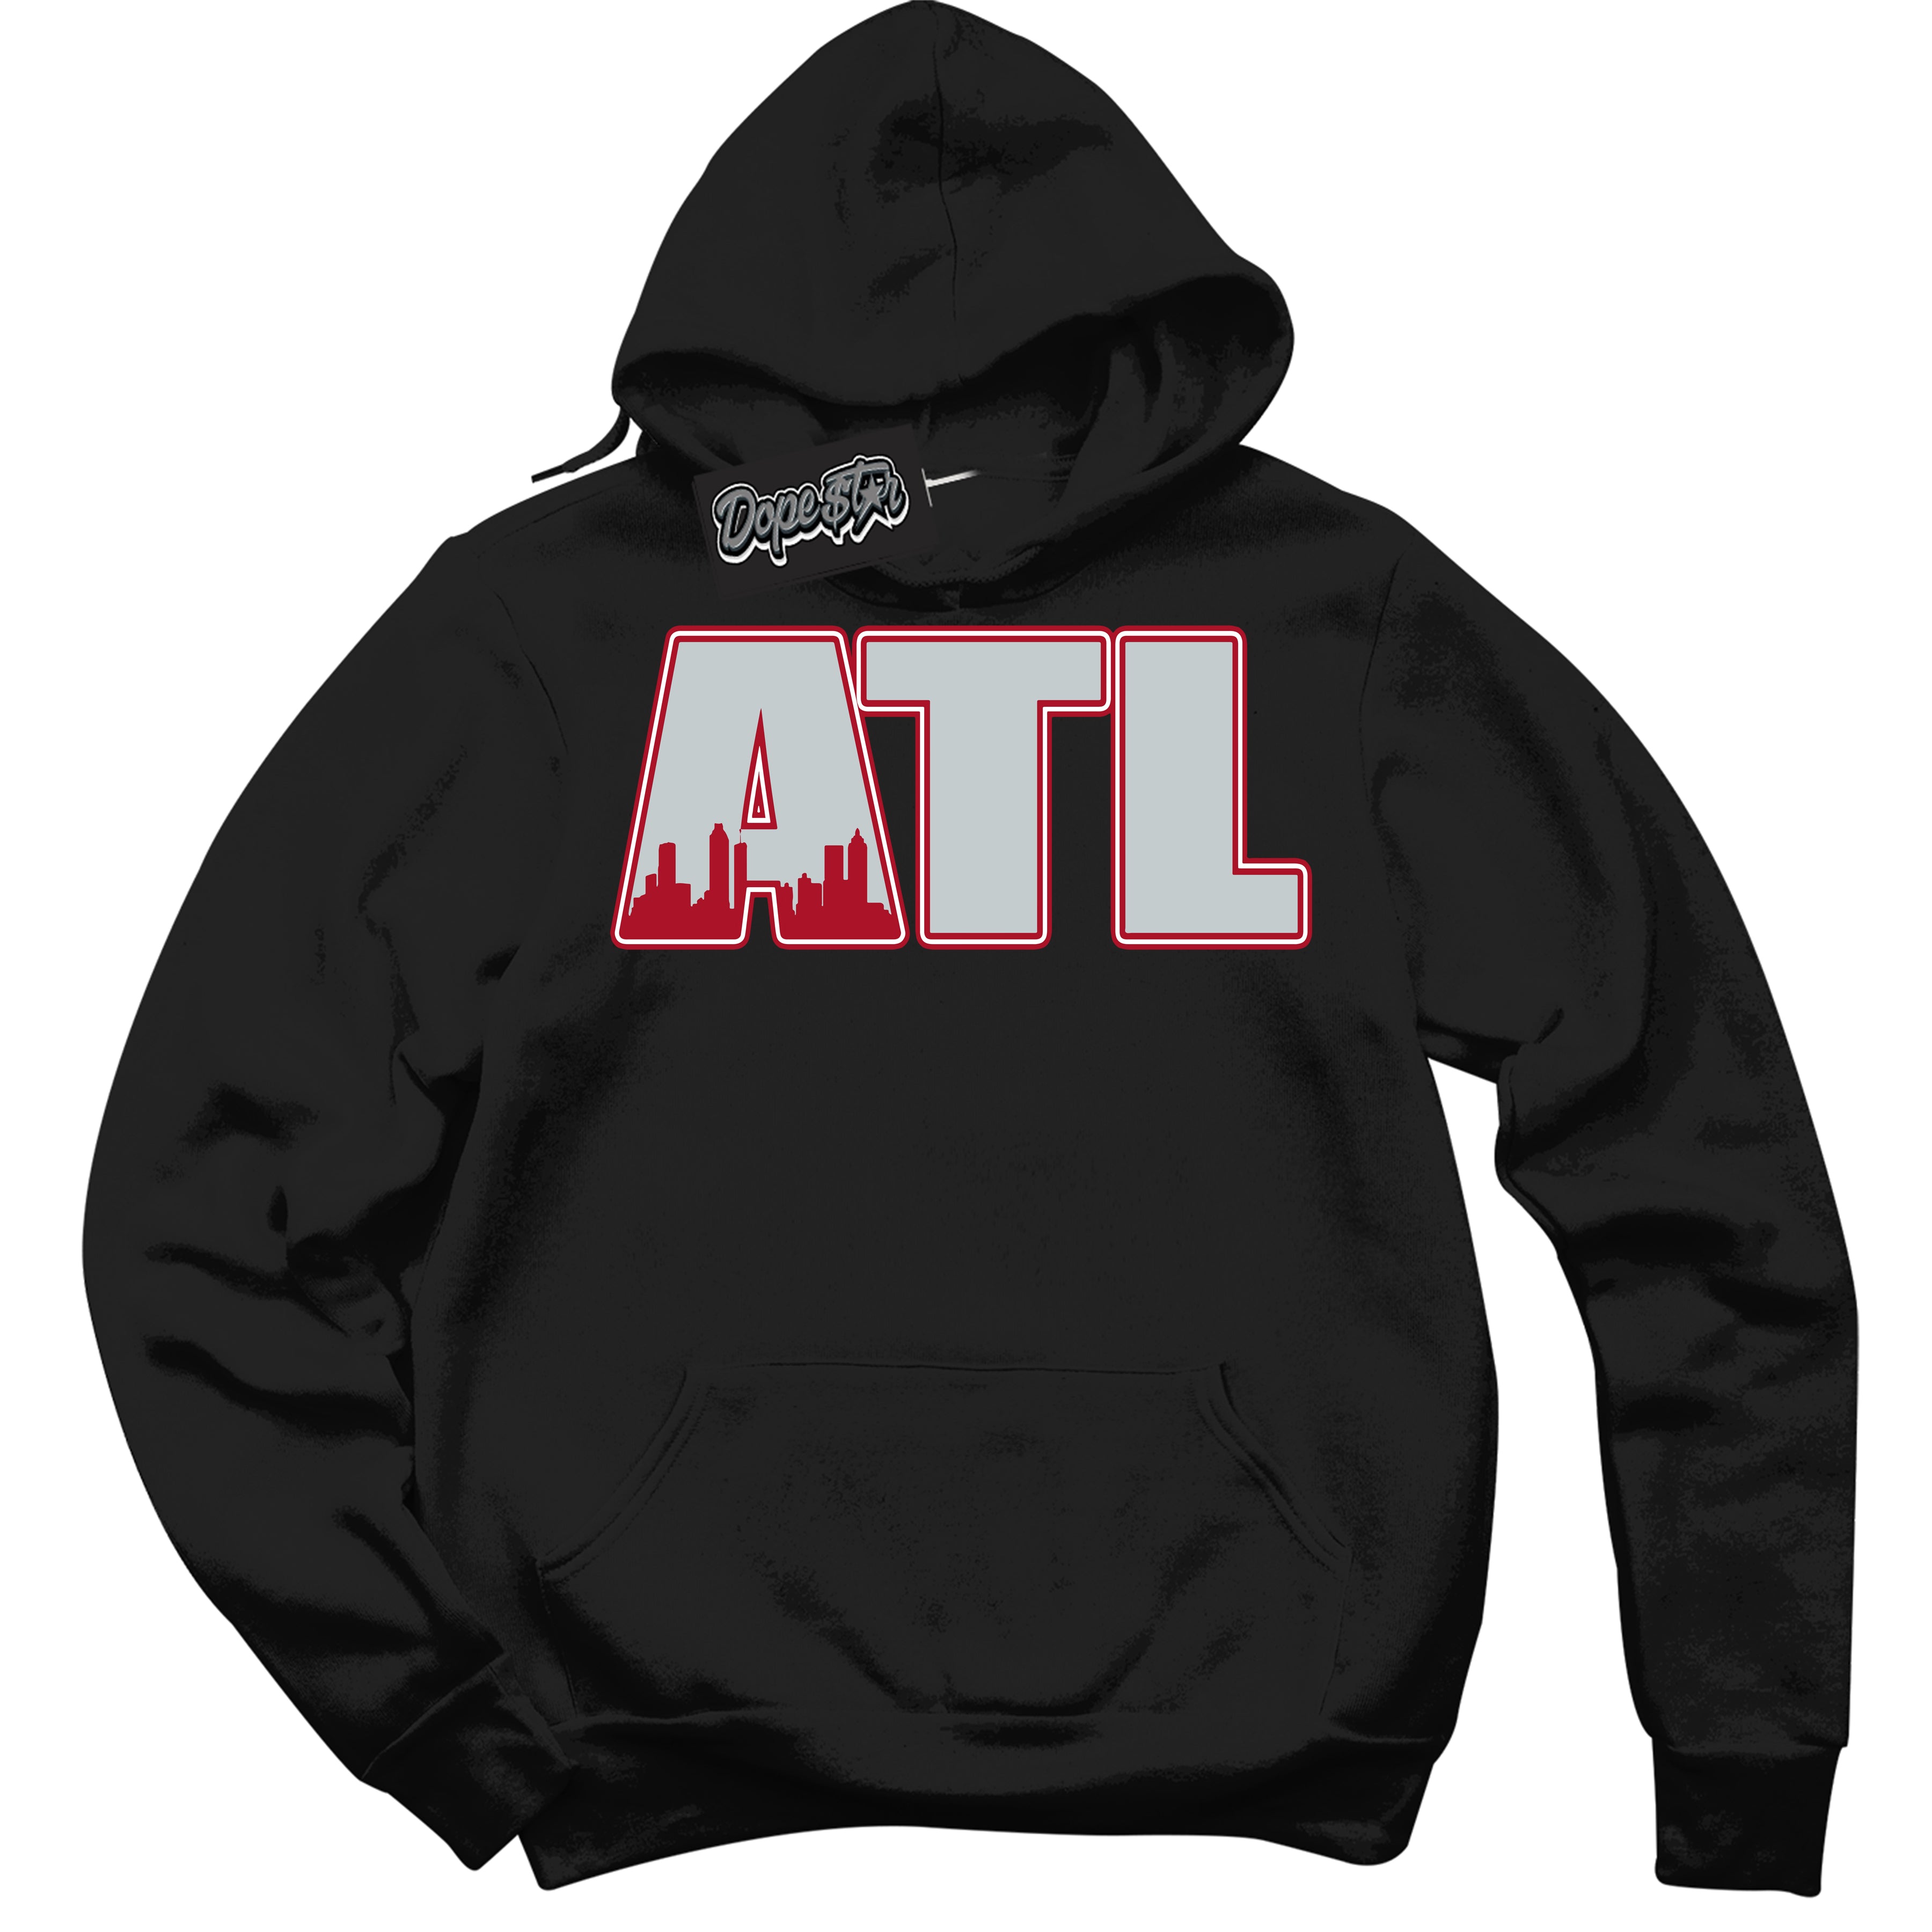 Cool Black Hoodie with “ Atlanta ”  design that Perfectly Matches  Reverse Ultraman Sneakers.